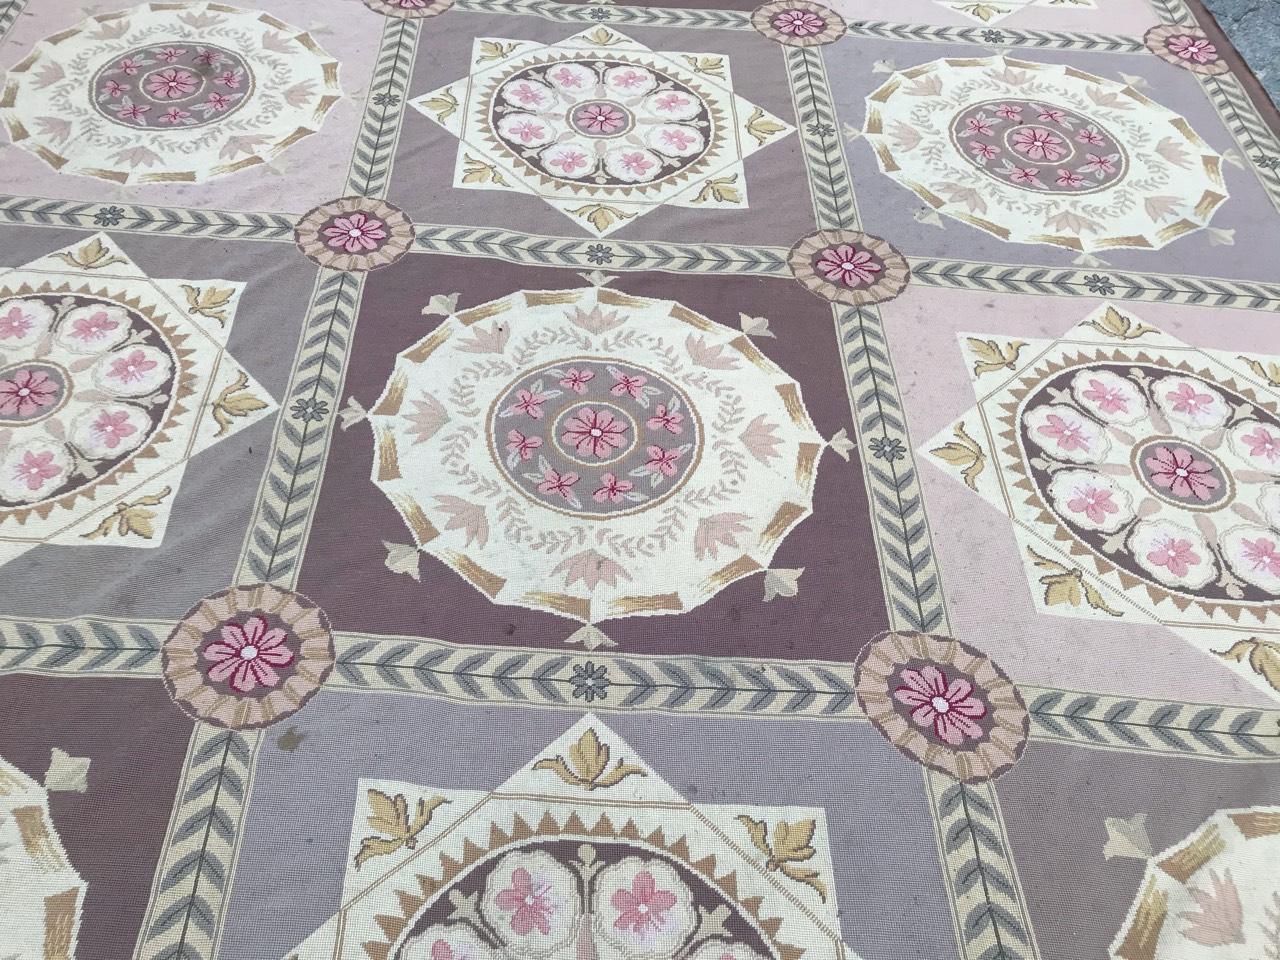 Nice large rug with a beautiful Aubusson Louis XVI design, and light colors with pink, grey and purple, entirely hand needlepoint embroidered with wool on cotton foundation.